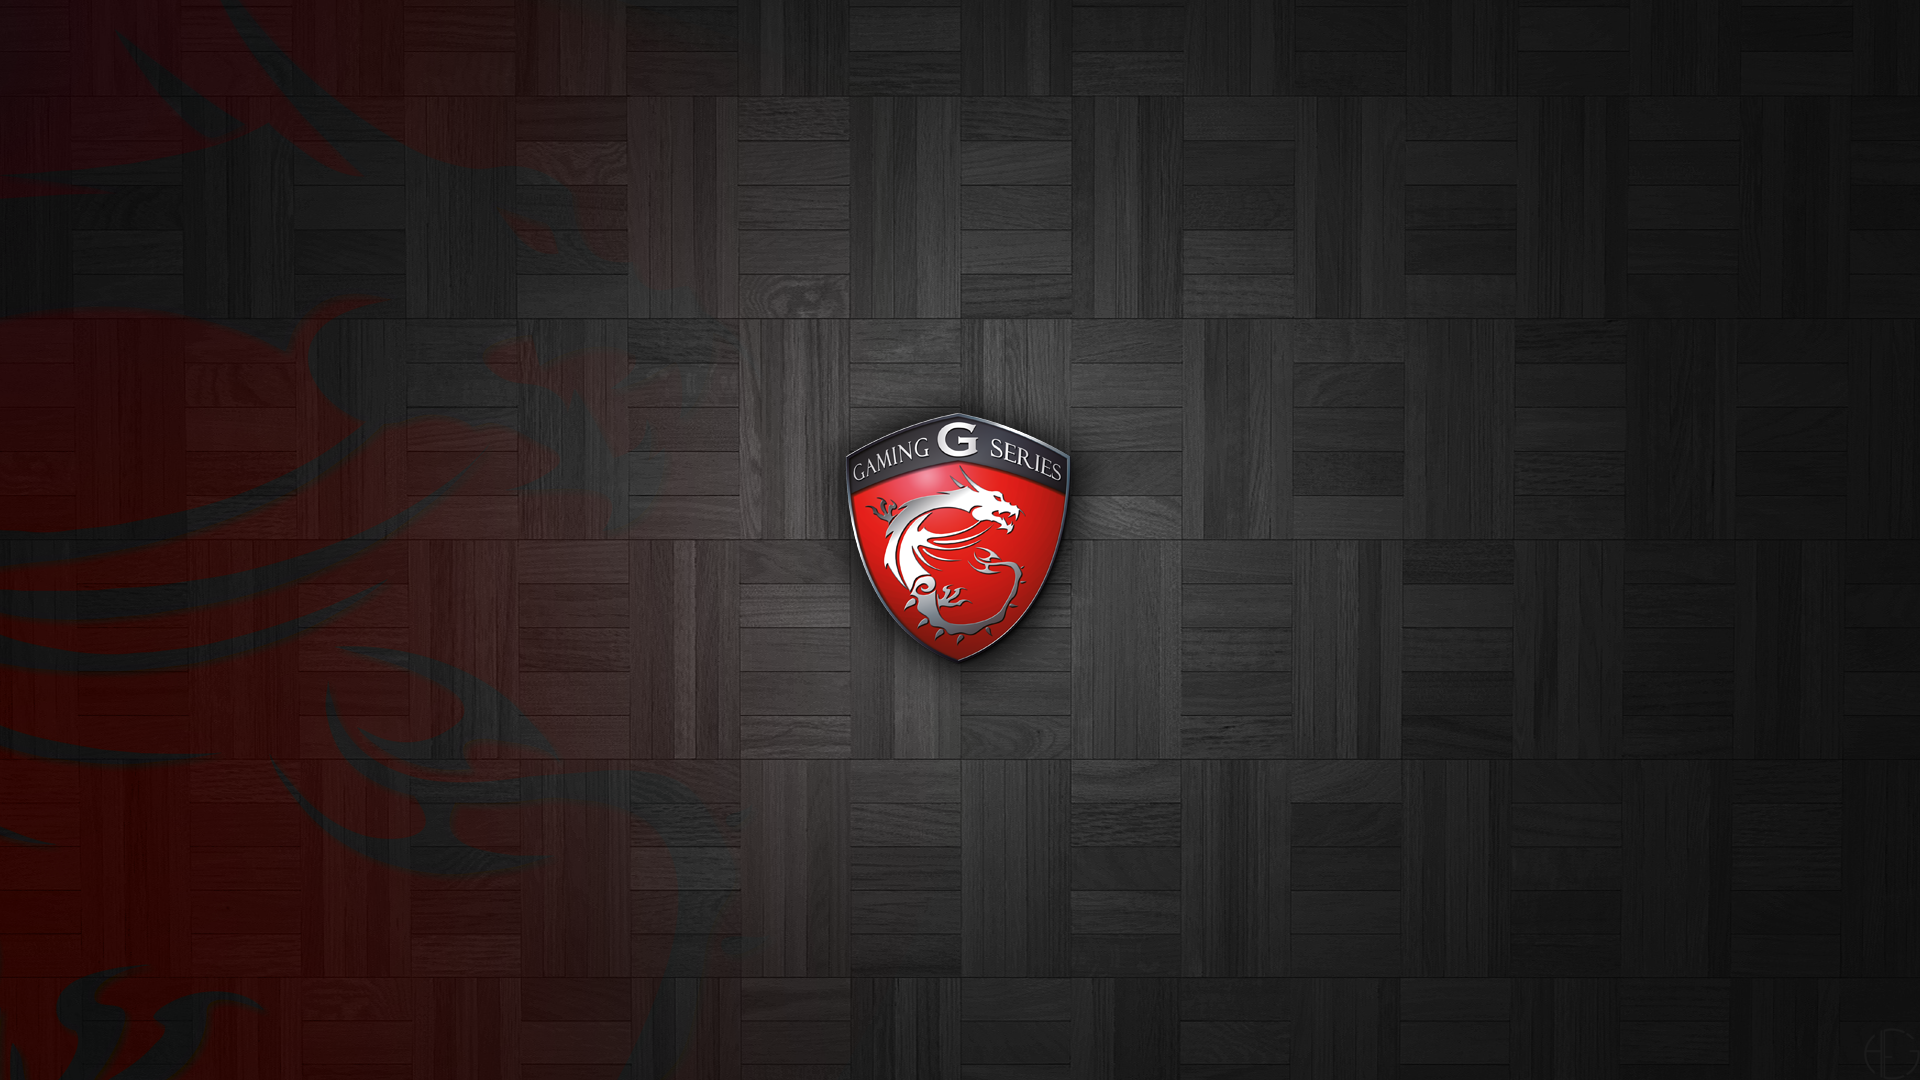 cool 45 MSI Wallpaper for Laptops. Computer wallpaper desktop wallpaper, Laptop wallpaper, Landscape wallpaper